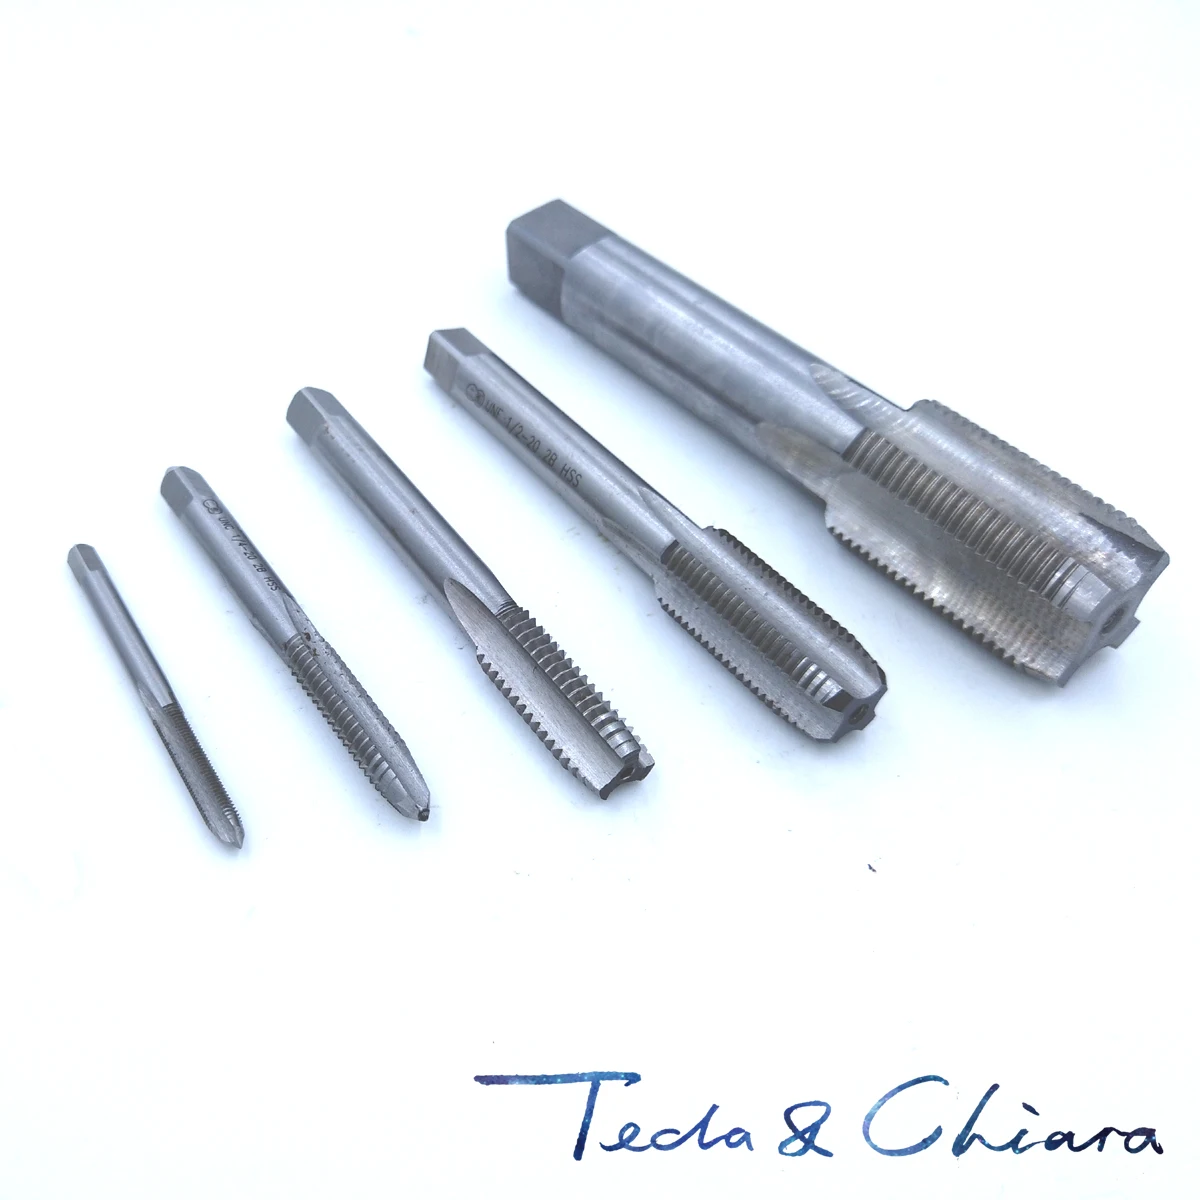 1pc Metric Right Hand Die M1.6 X 0.35 mm Threading Tools 